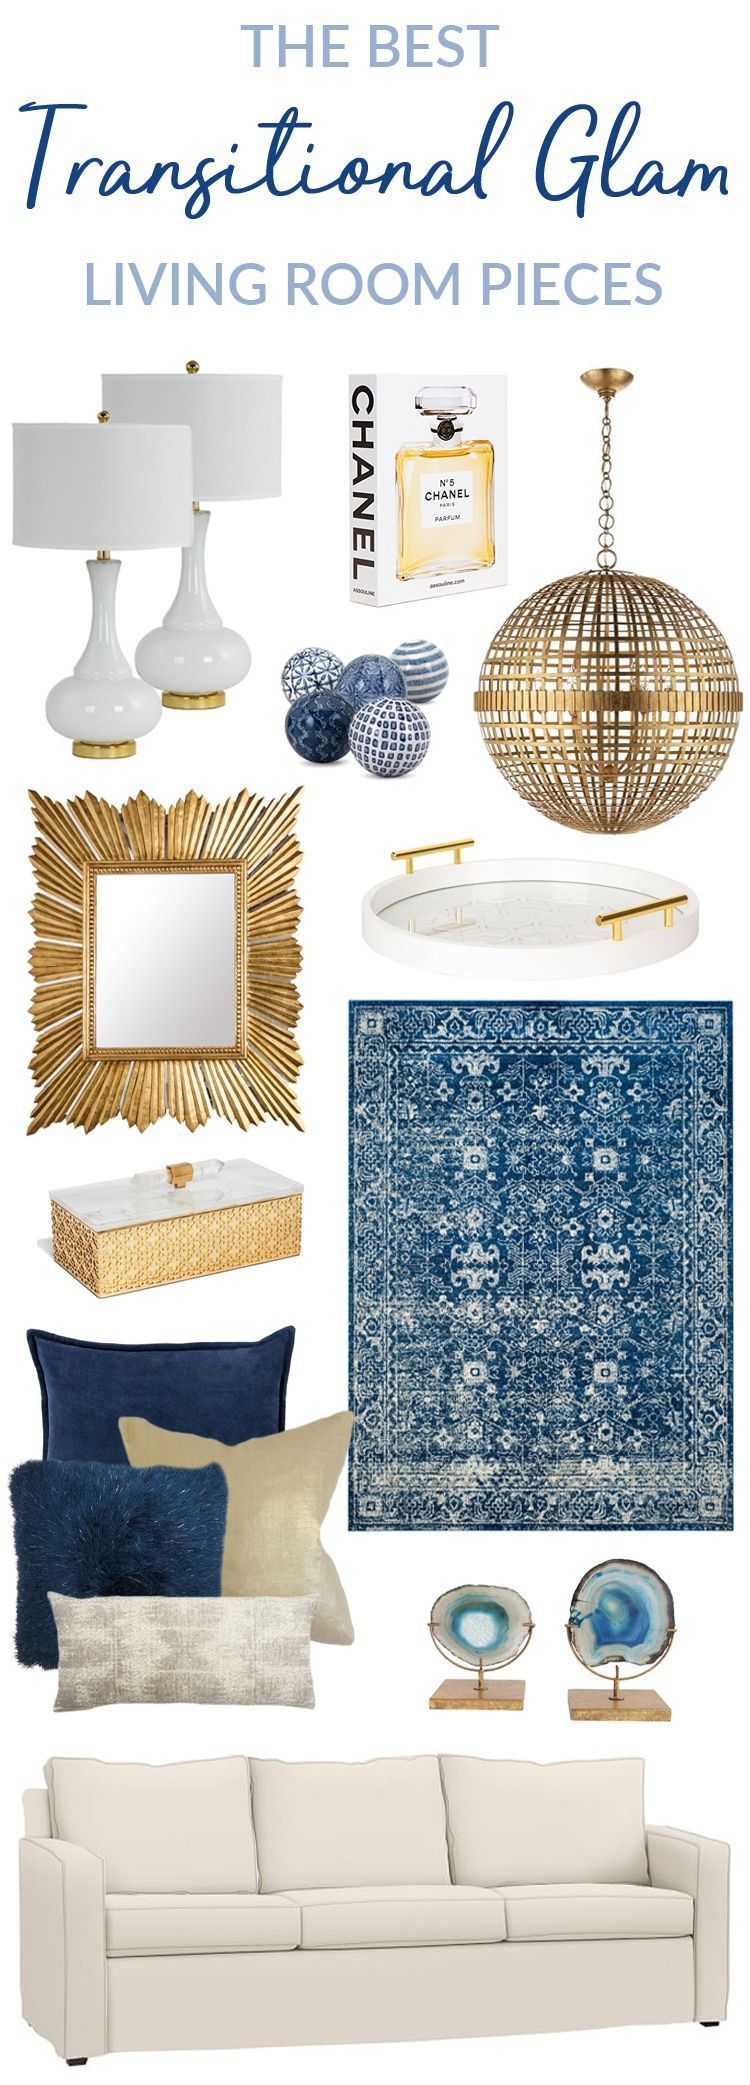 The Best Transitional Glam Living Room Pieces -   12 home accents Pieces entryway ideas